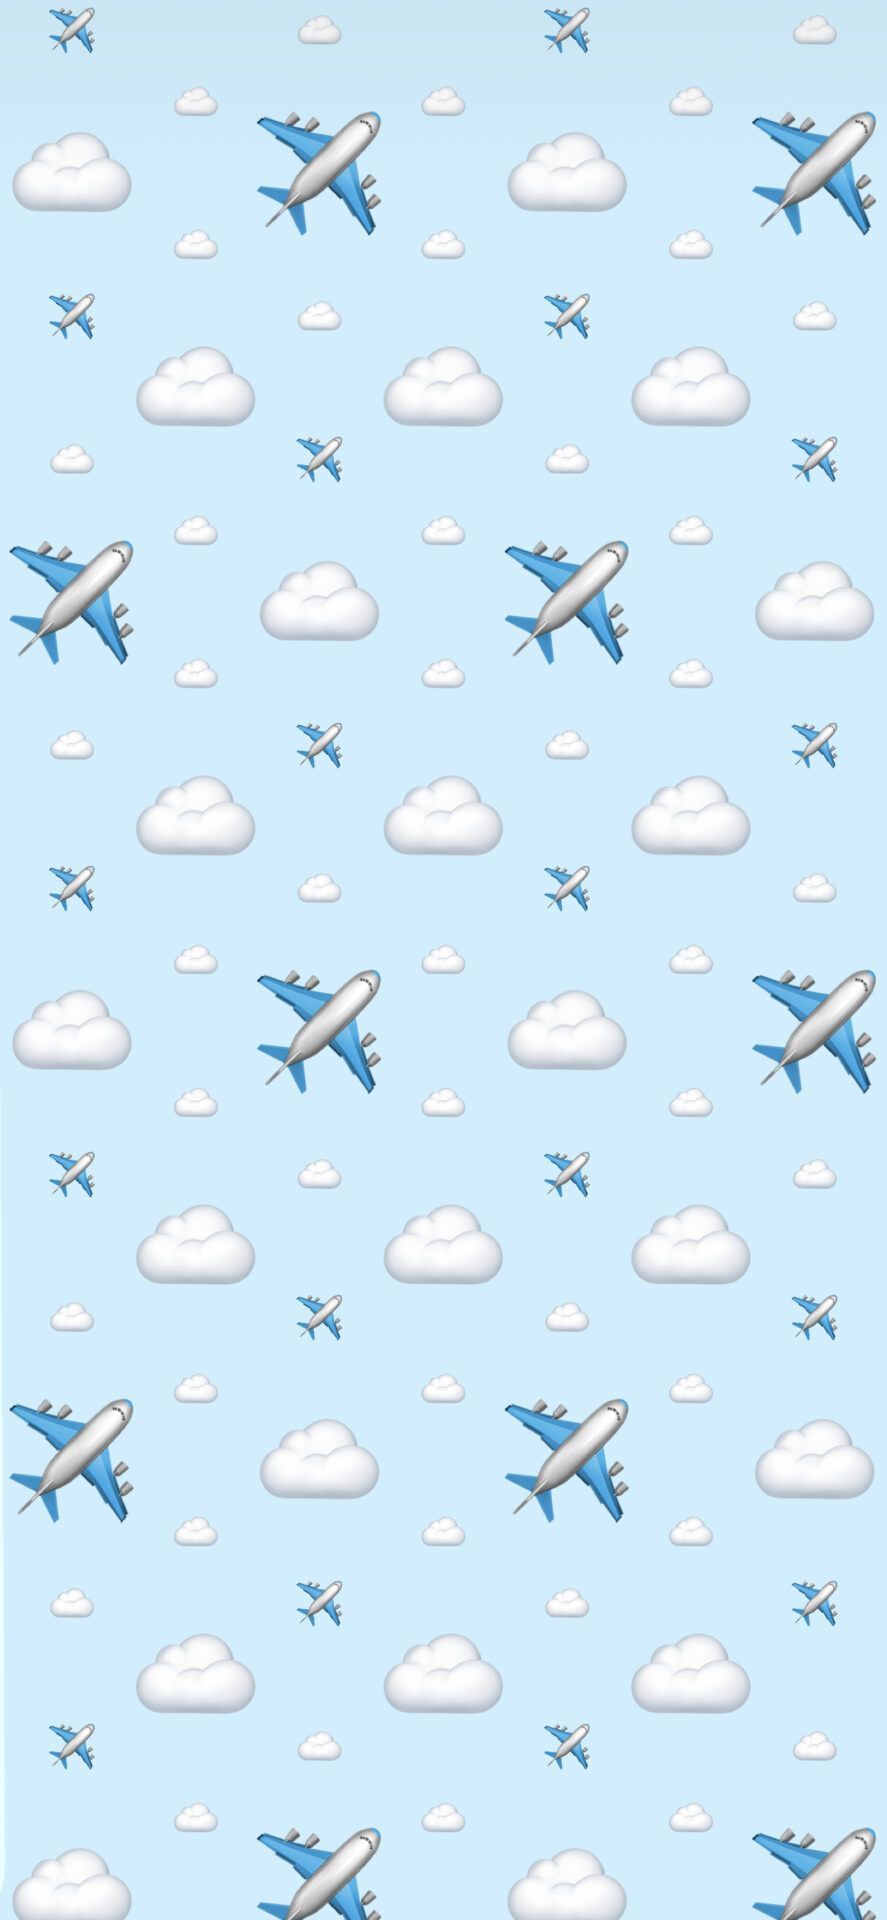 Airplane wallpaper for your phone - Emoji